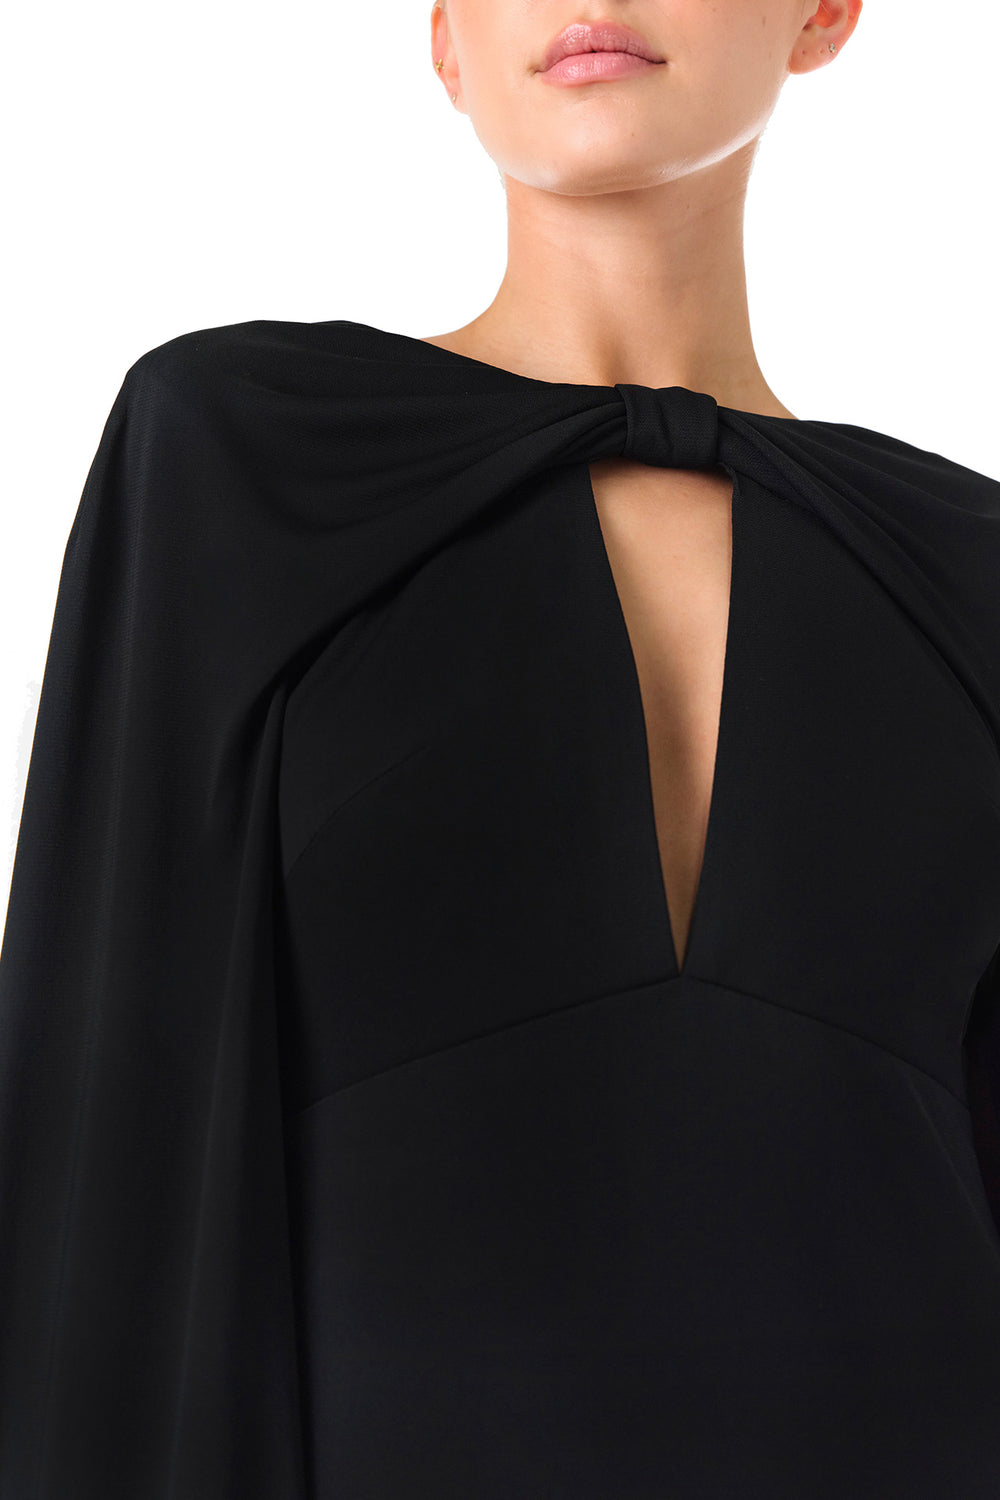 Monique Lhuillier Spring 2024 black crepe-back satin gown with attached cape and keyhole bodice - keyhole detail.